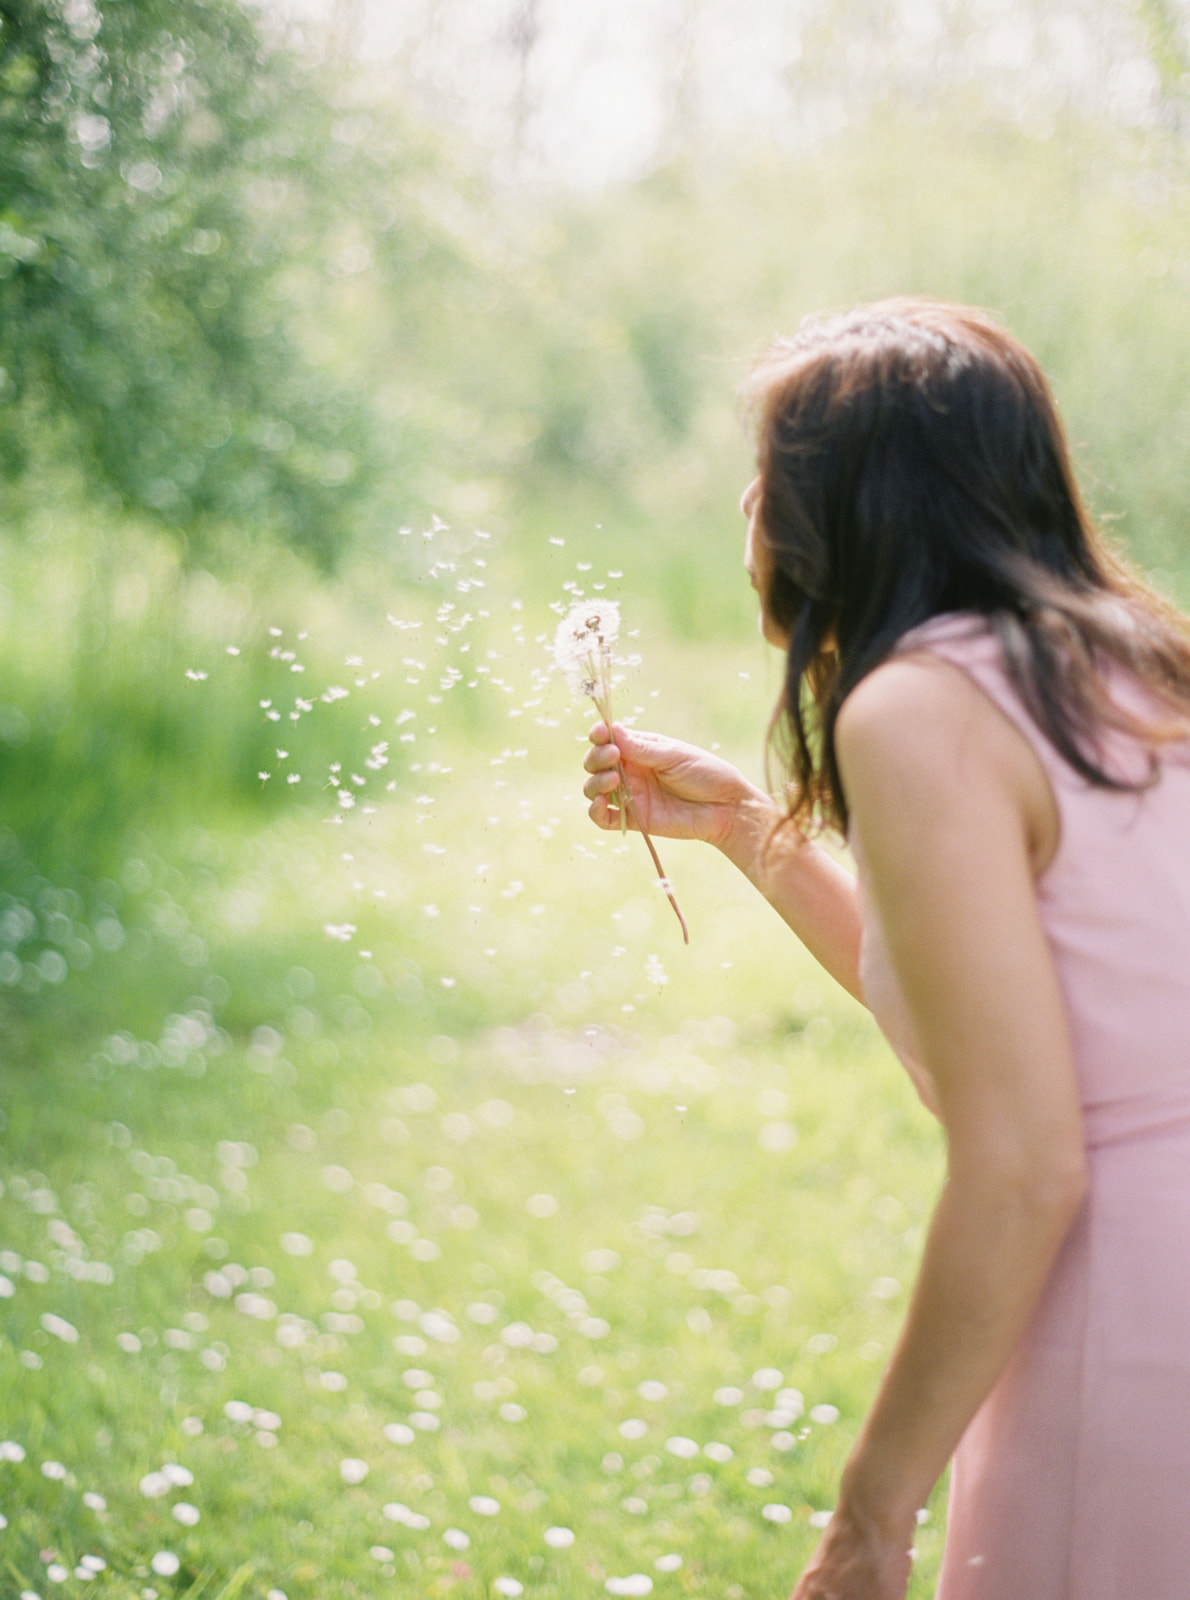 a woman in a pink dress makes a wish with a dandelion